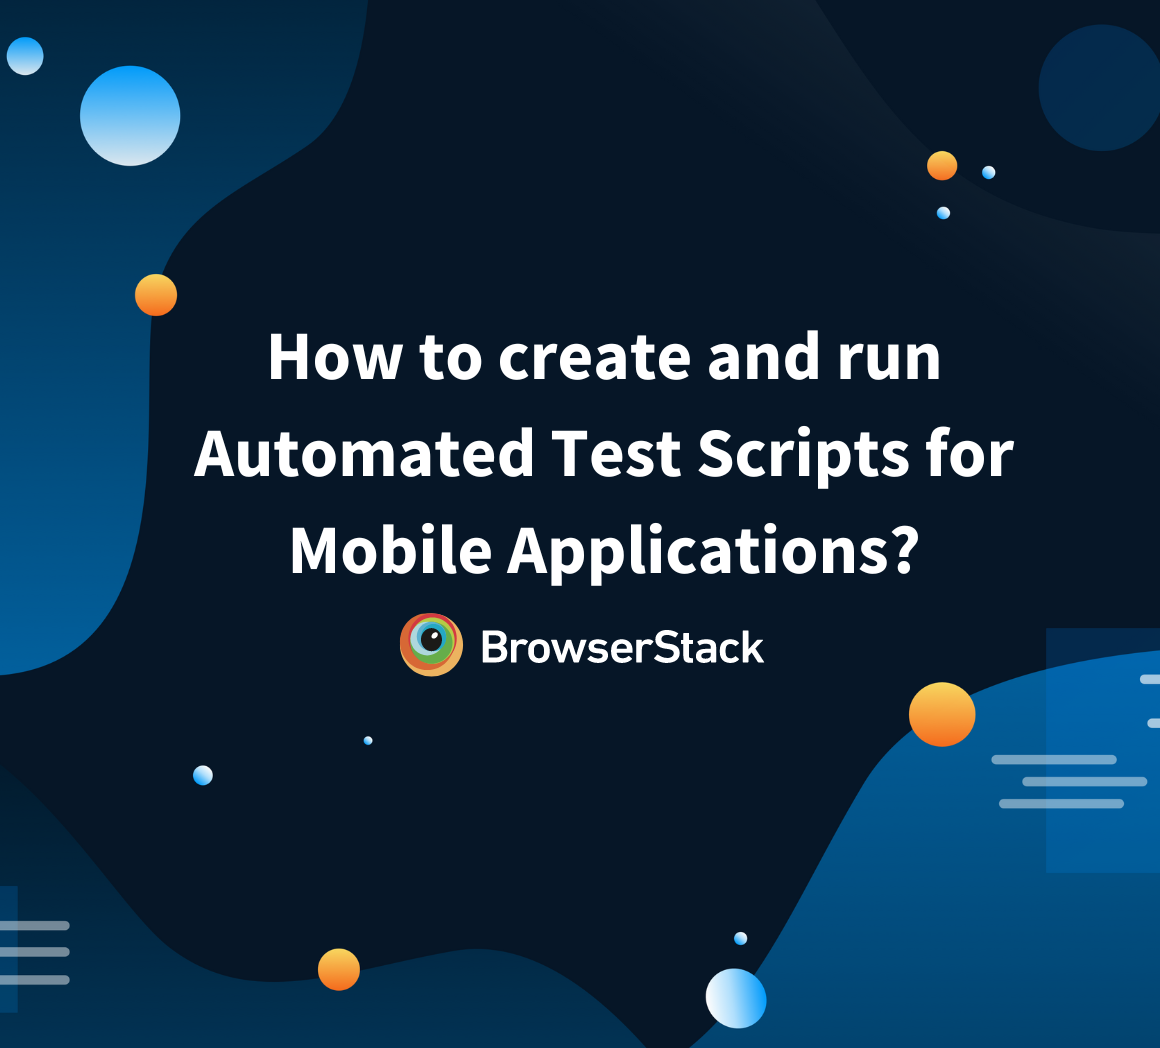 How to create and run Automated Test Scripts for Mobile Applications?